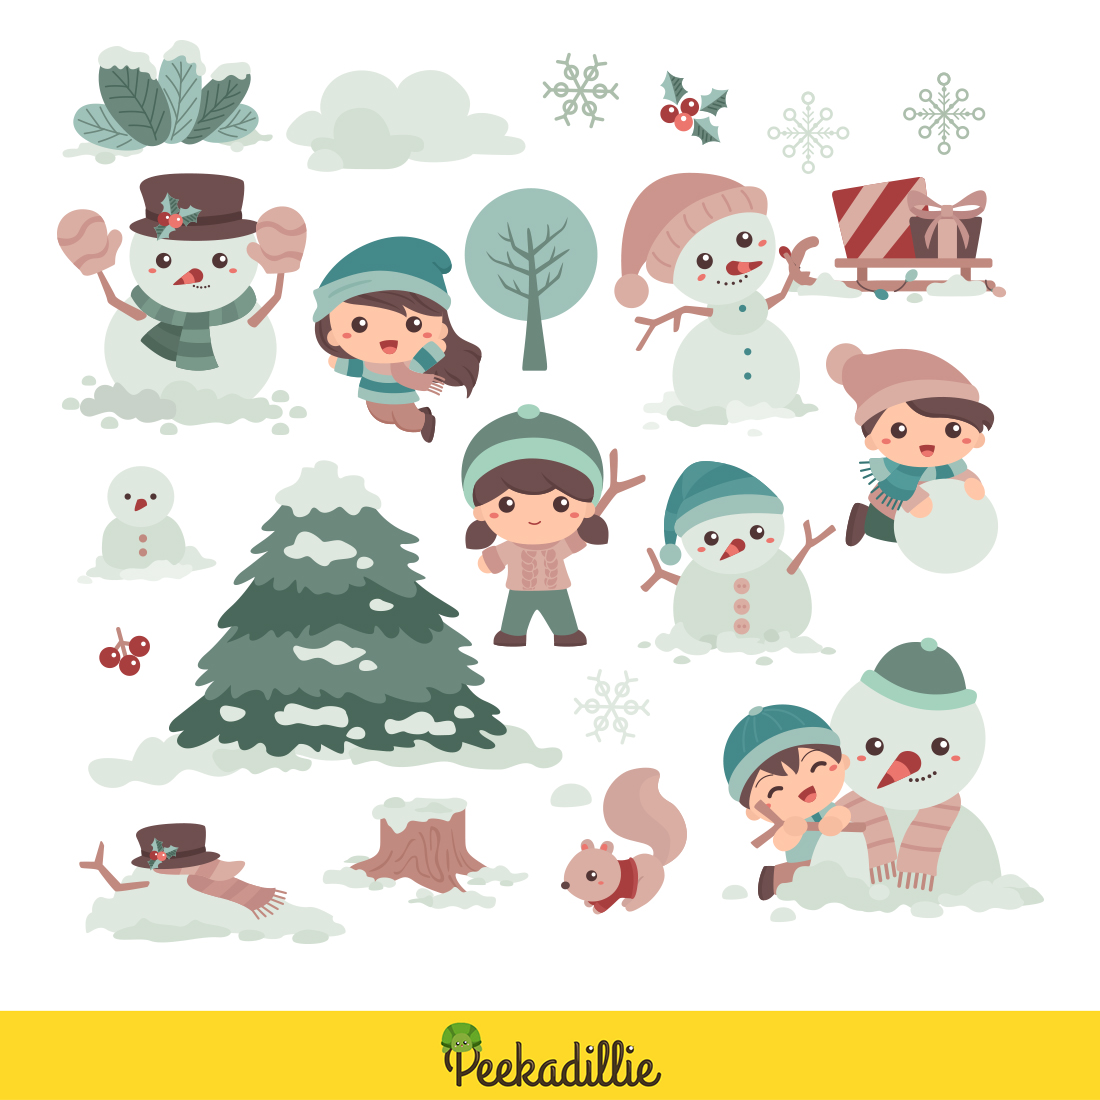 Kids and Snowman Christmas Holiday Nature Tree Snowflake Animal Present Gift Activity Sticker Illustration Vector Clipart Cartoon preview image.